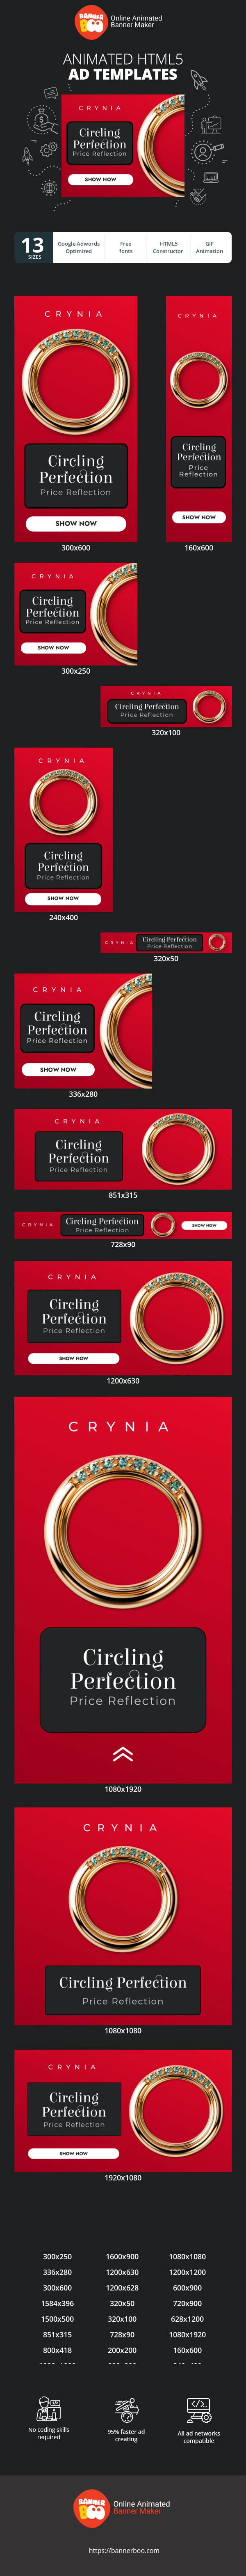 Banner ad template — Circling Perfection Price Reflection — Jewelry Sale